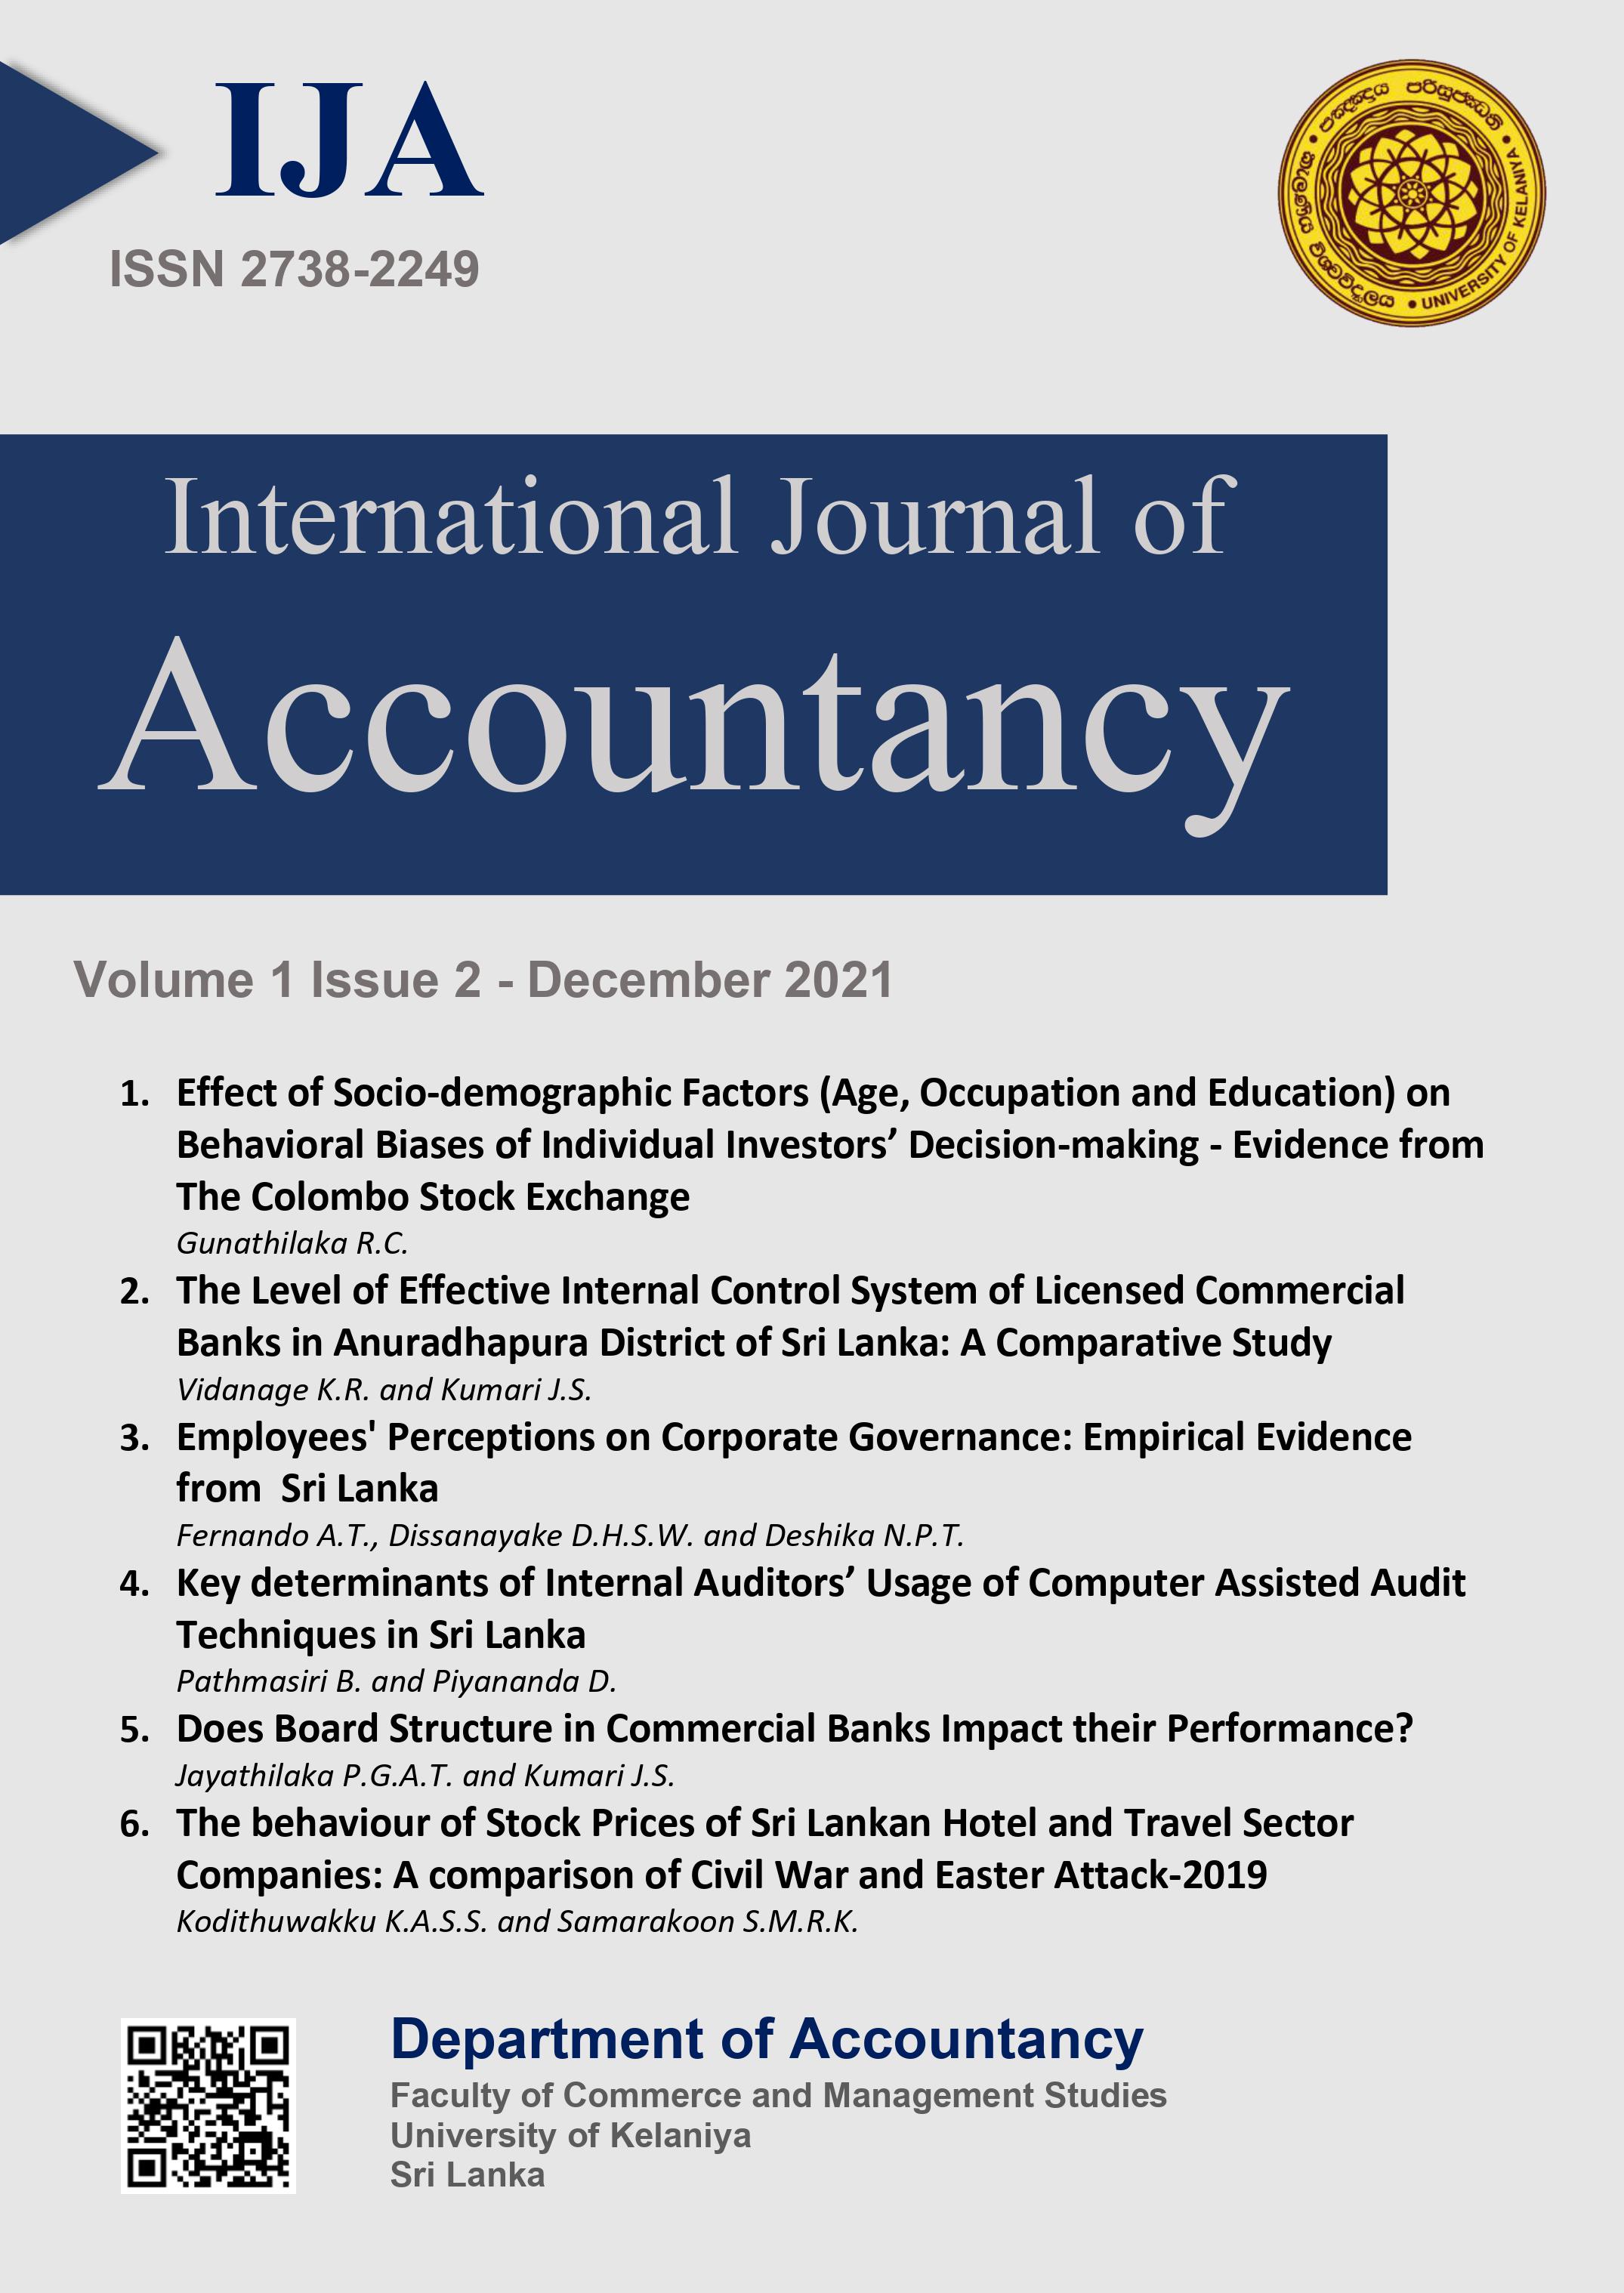 International Journal of Accountancy (IJA) has been published - Volume 1 Issue 2